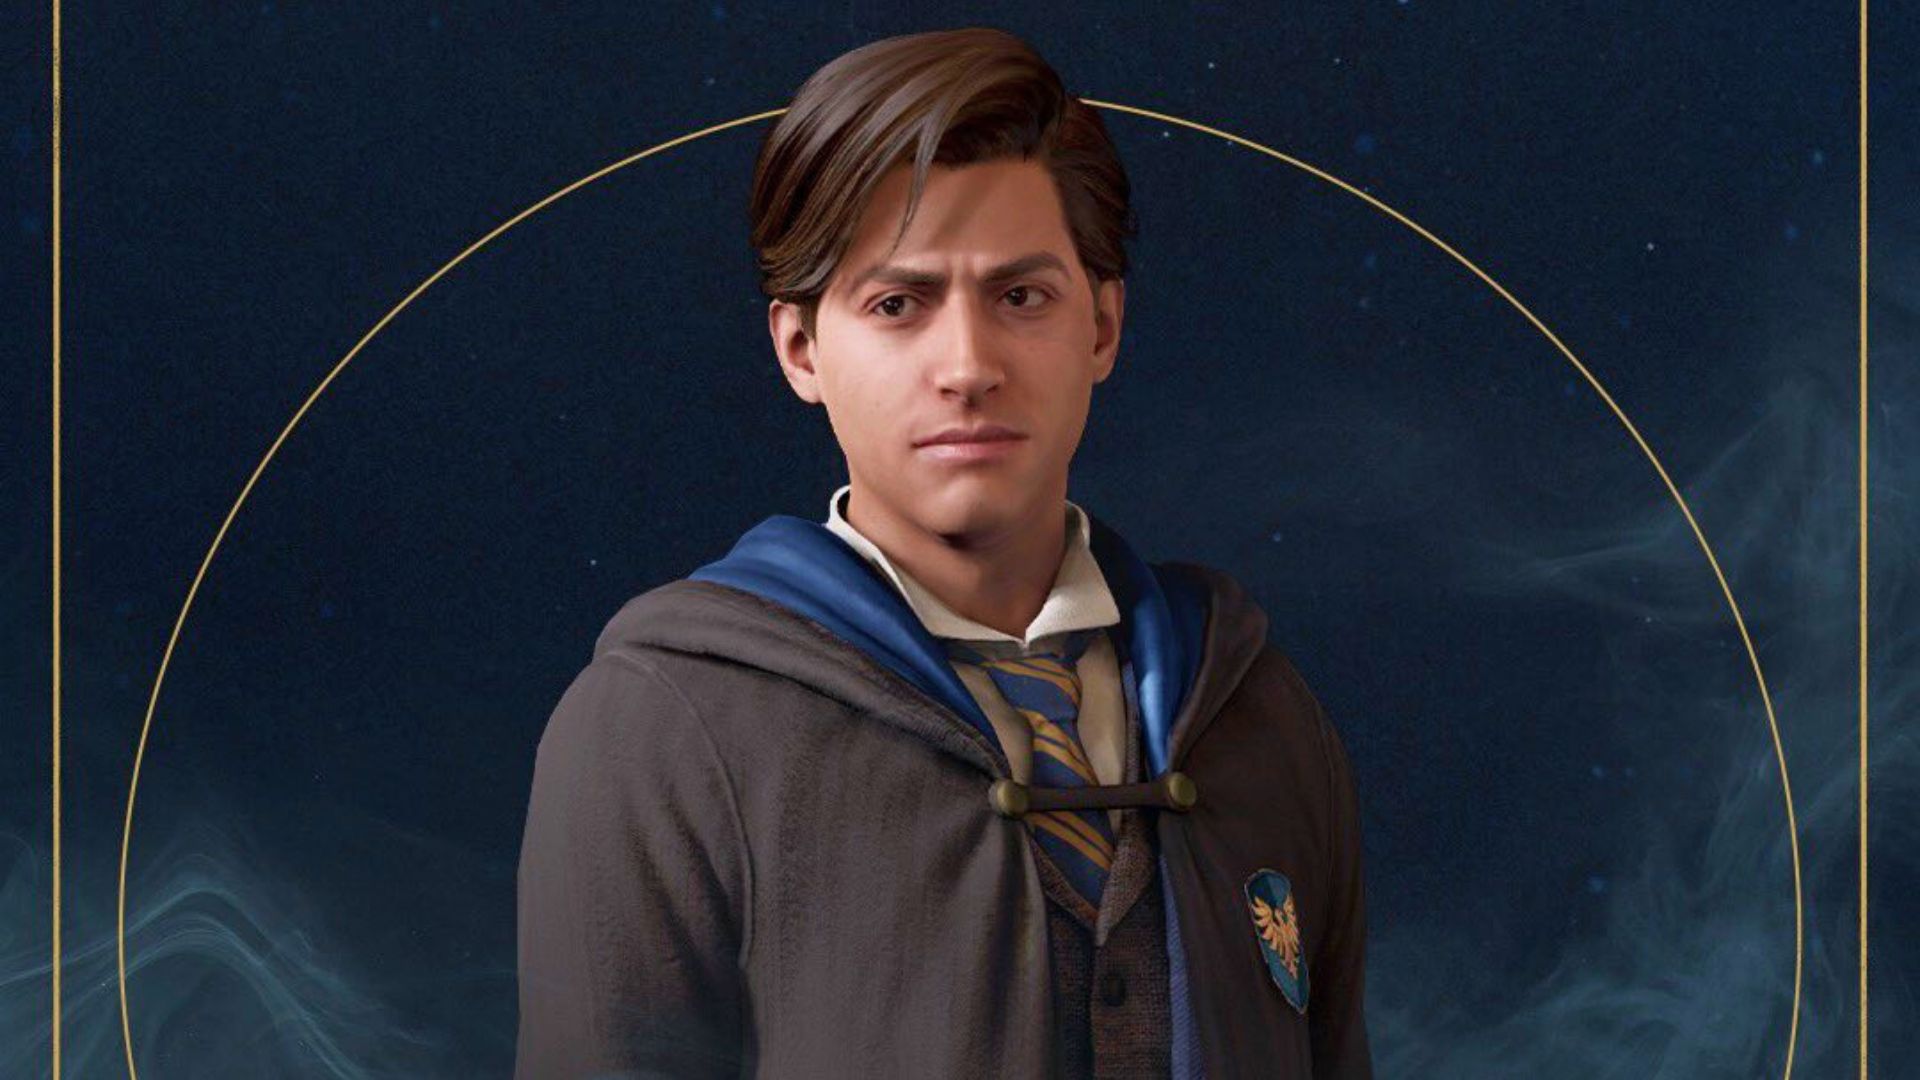 Hogwarts Legacy Ravenclaw companion revealed in Harry Potter game